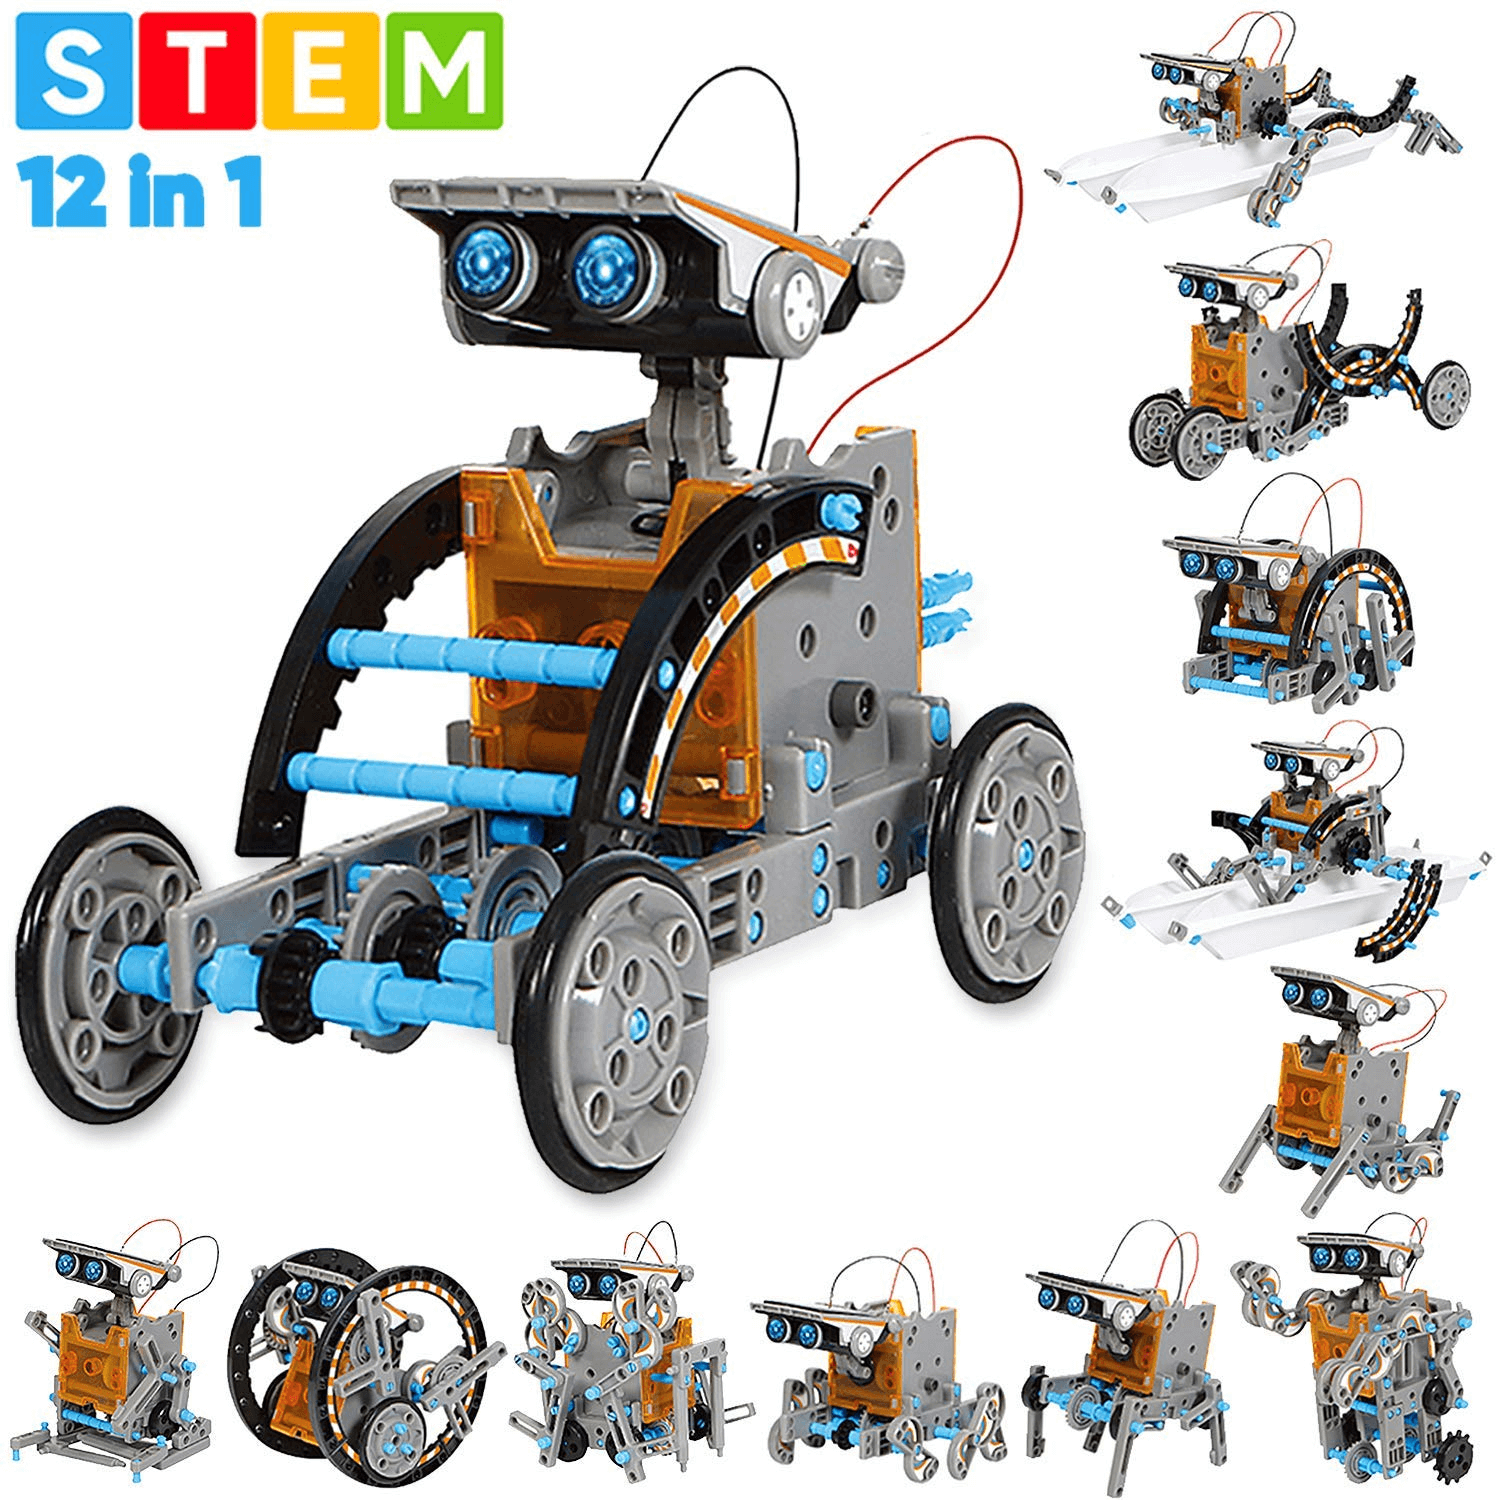 Buy lucky doug stem building projects toys for kids 8 9 10 11 12+ year old,  256 pcs metal building construction model kit, engineering building blocks  diy educational gifts on Promallshop